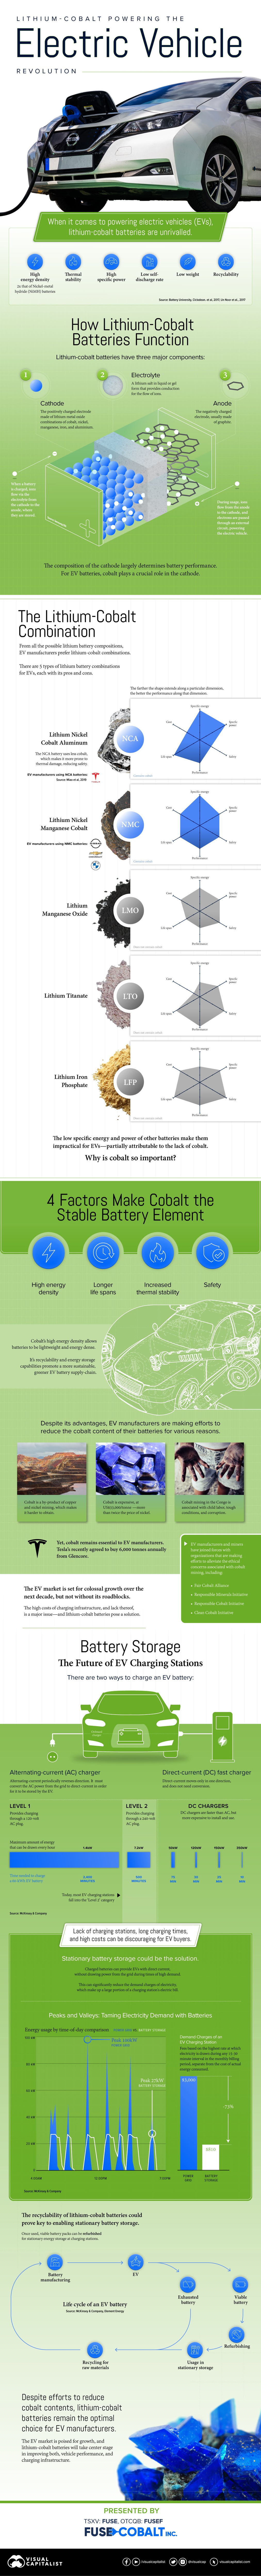 lithium-cobalt-batteries-powering-the-electric-vehicle-revolution-infographic